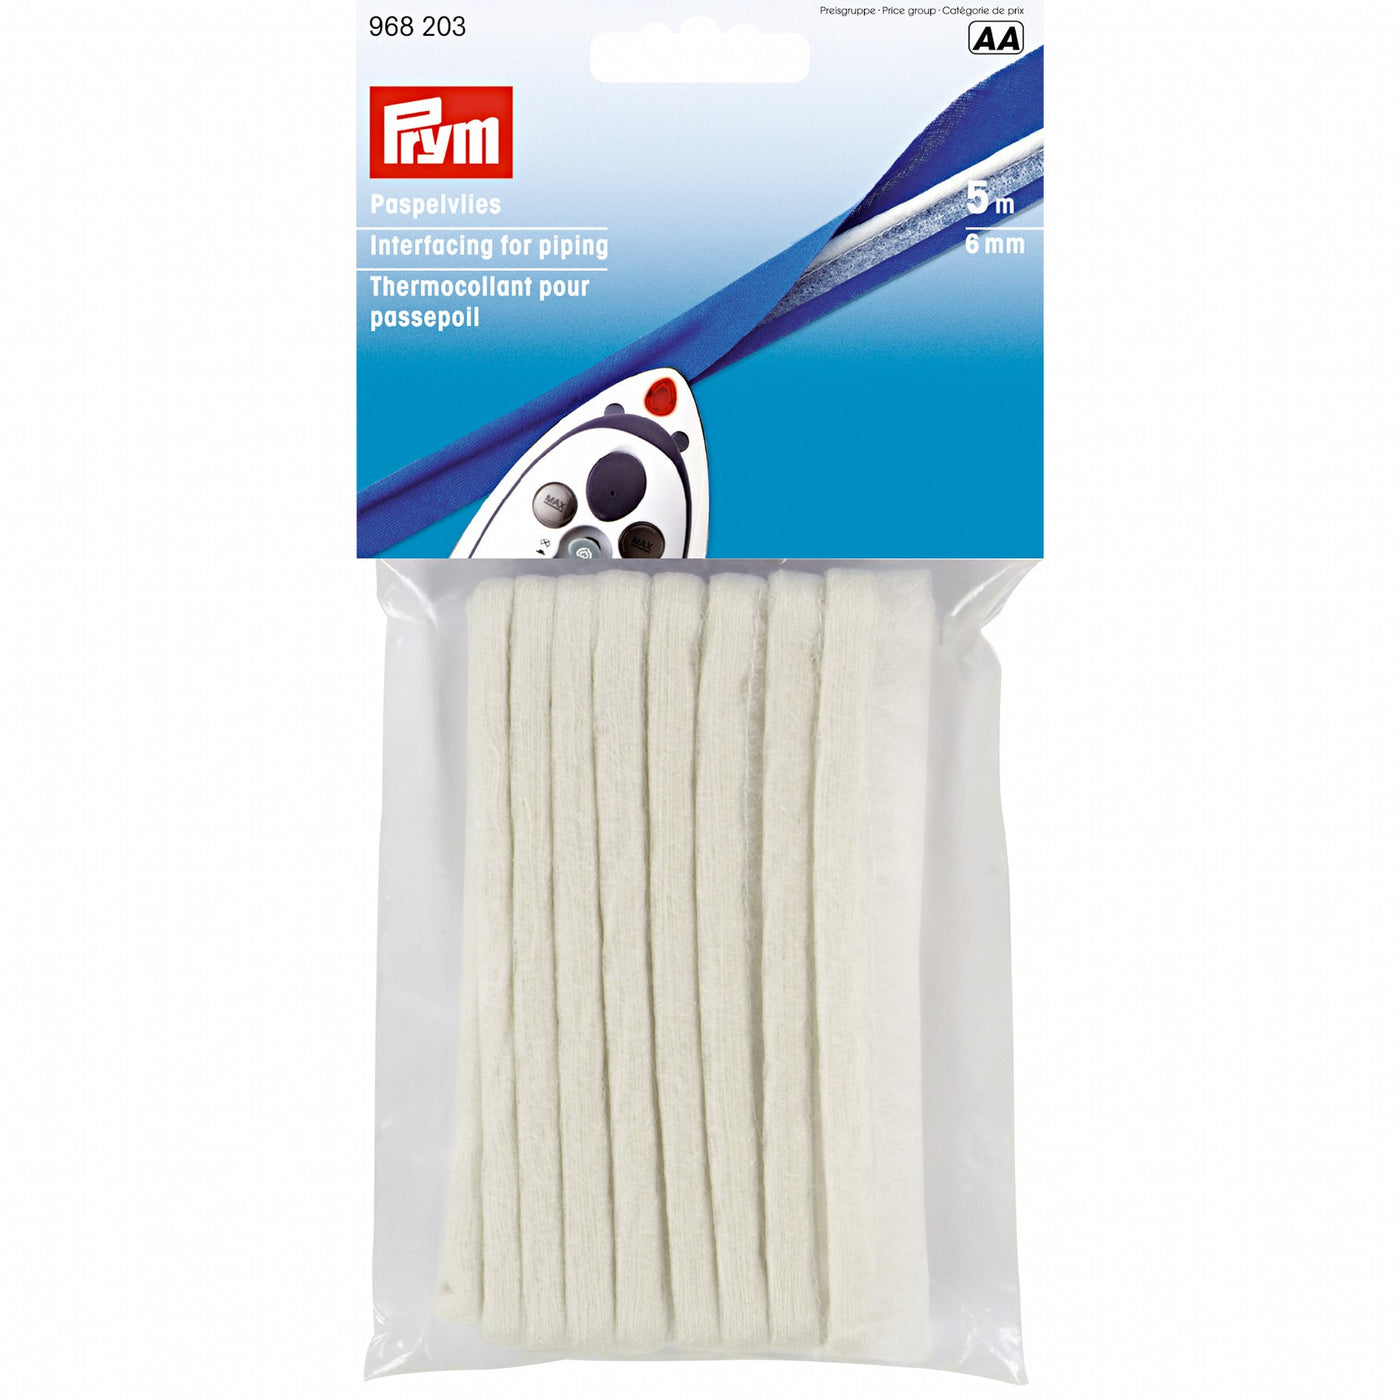 Prym interfacing for piping 6 mm x 5 m. Make flanged piping the easy way